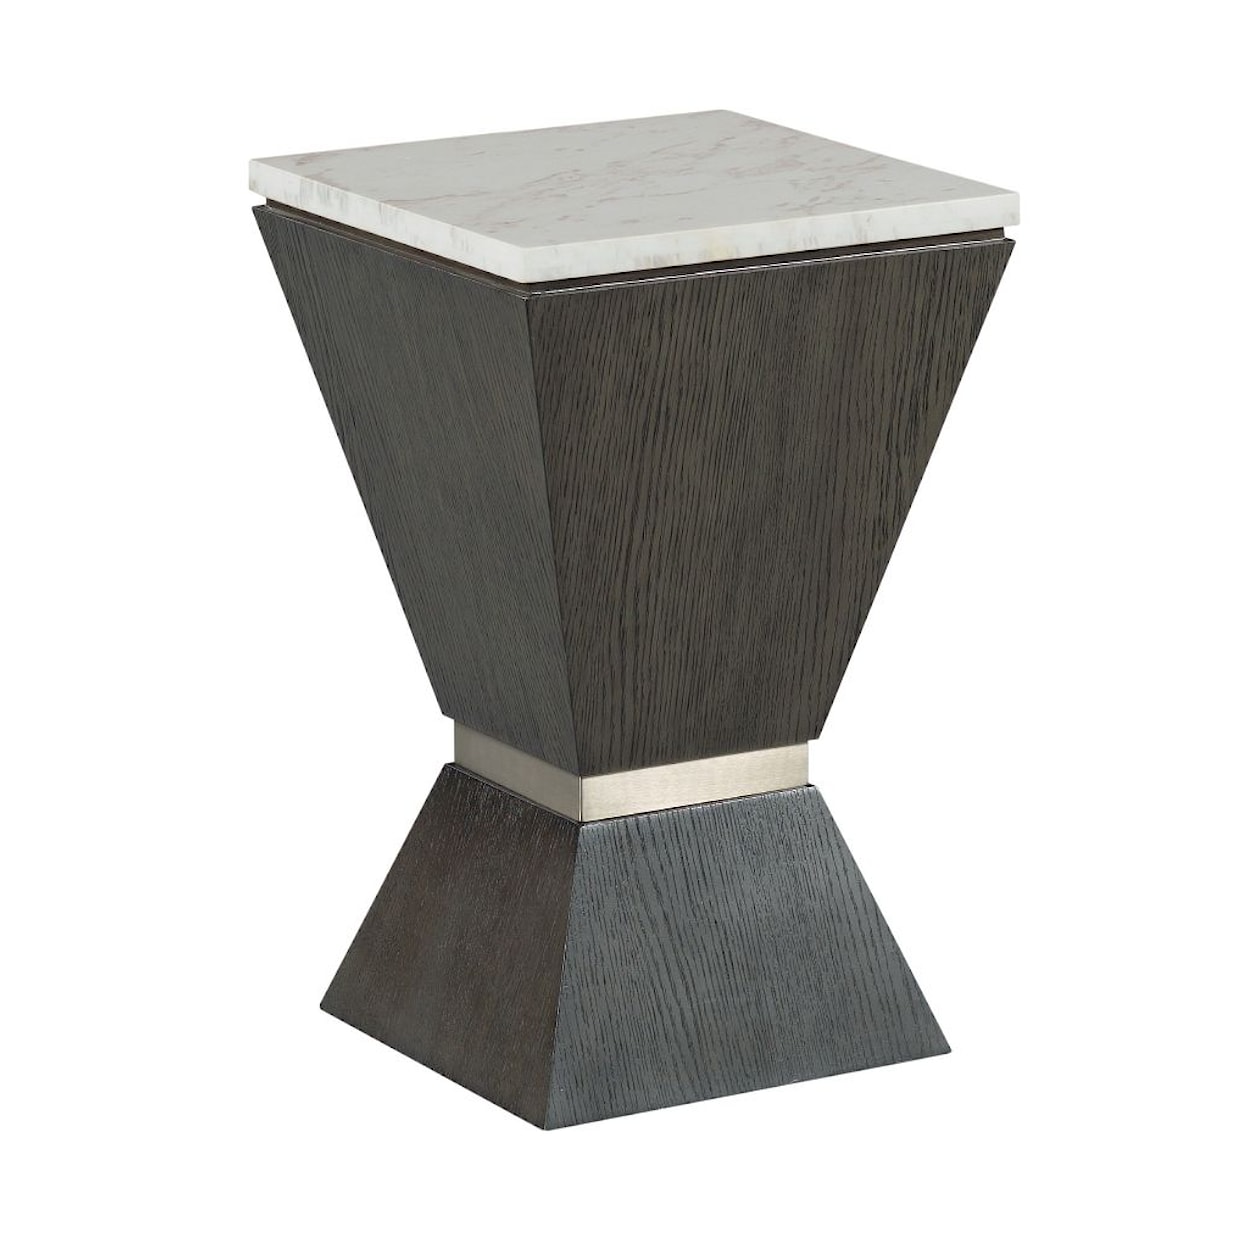 Hammary Prelude Chairside Table